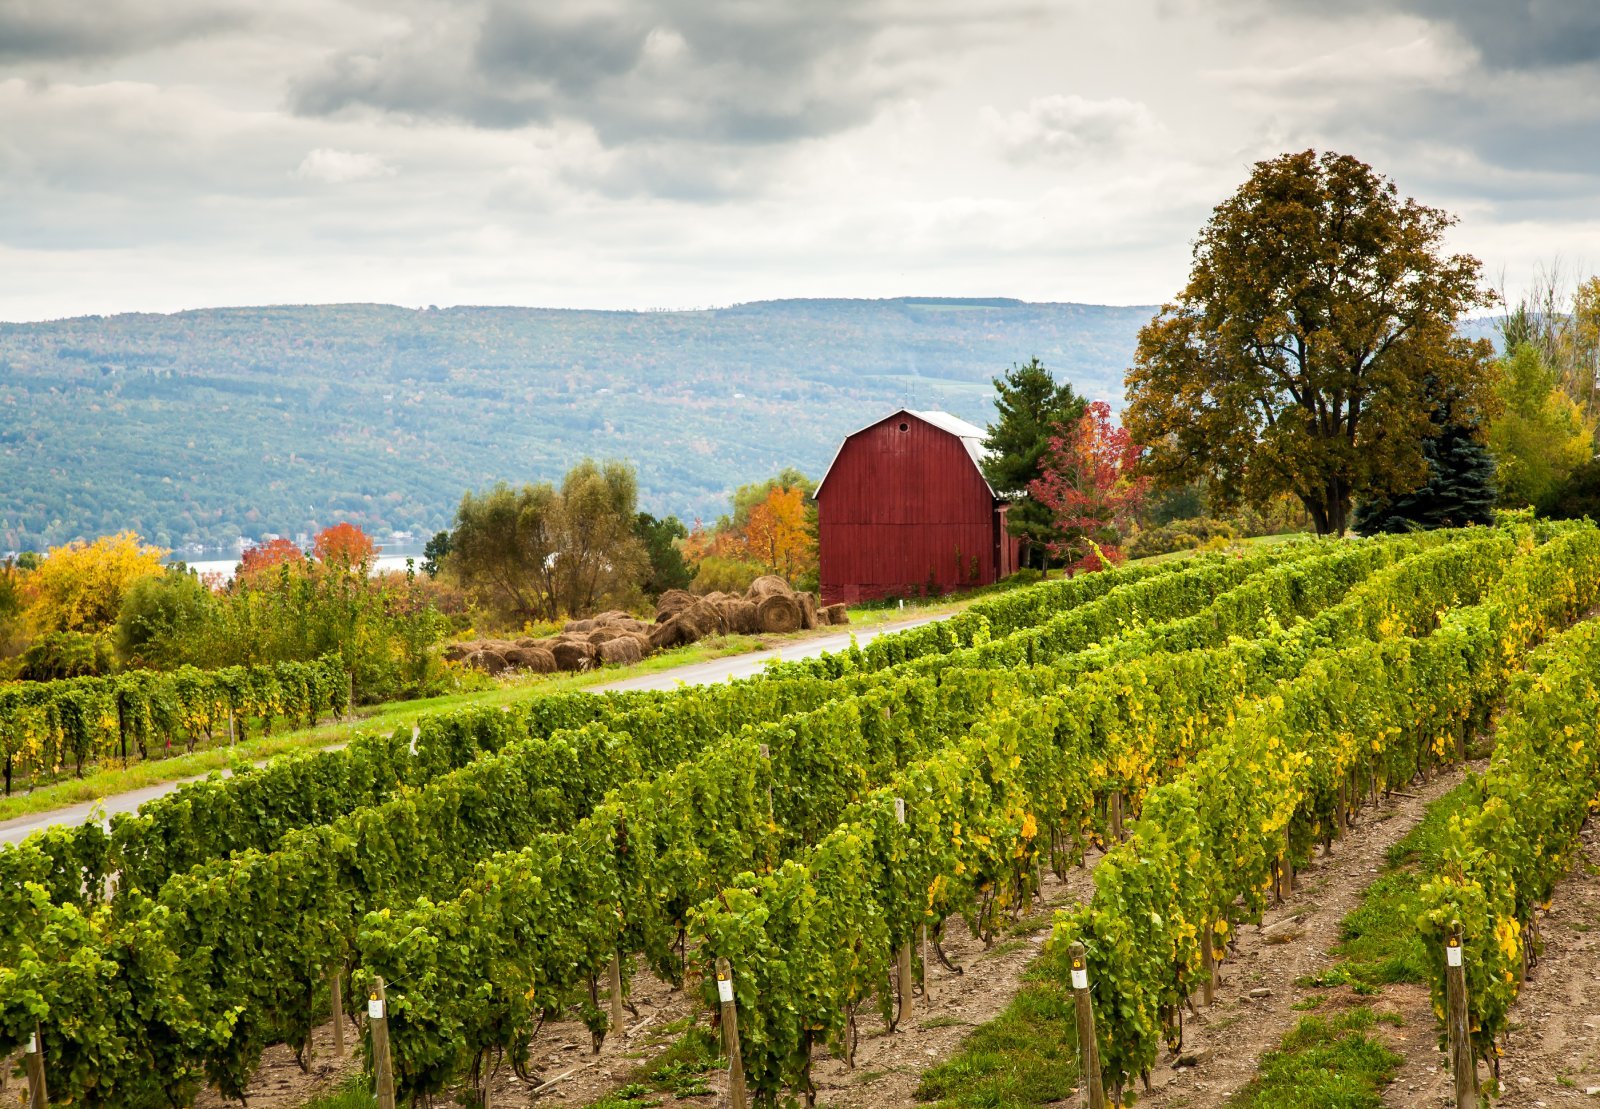 <p><span>The Finger Lakes region in New York State is emerging as a leader in sustainable viticulture in the United States. With its deep glacial lakes and fertile soil, the region is ideal for producing wines, particularly Rieslings and cool-climate varietals. Wineries in the Finger Lakes increasingly adopt sustainable practices, focusing on soil health, water conservation, and biodiversity.</span></p> <p><span>The region’s commitment to sustainability extends to its community involvement and educational initiatives, making it a model for eco-friendly wine production.</span></p> <p><span>The natural beauty of the Finger Lakes, with its rolling hills and picturesque waterways, enhances the wine-tasting experience, making it a must-visit destination for those interested in sustainable winemaking.</span></p> <p><b>Insider’s Tip: </b><span>Explore the local farm-to-table restaurants that often feature wines from the region, enhancing your culinary experience with locally sourced ingredients.</span></p> <p><b>When to Travel: </b>L<span>ate spring to early fall is ideal for visiting, with the added bonus of witnessing the spectacular fall foliage.</span></p> <p><b>How To Get There: </b><span>The Finger Lakes region is about a 4-5 hour drive from New York City or a short flight to Rochester or Syracuse, followed by a scenic drive.</span></p>